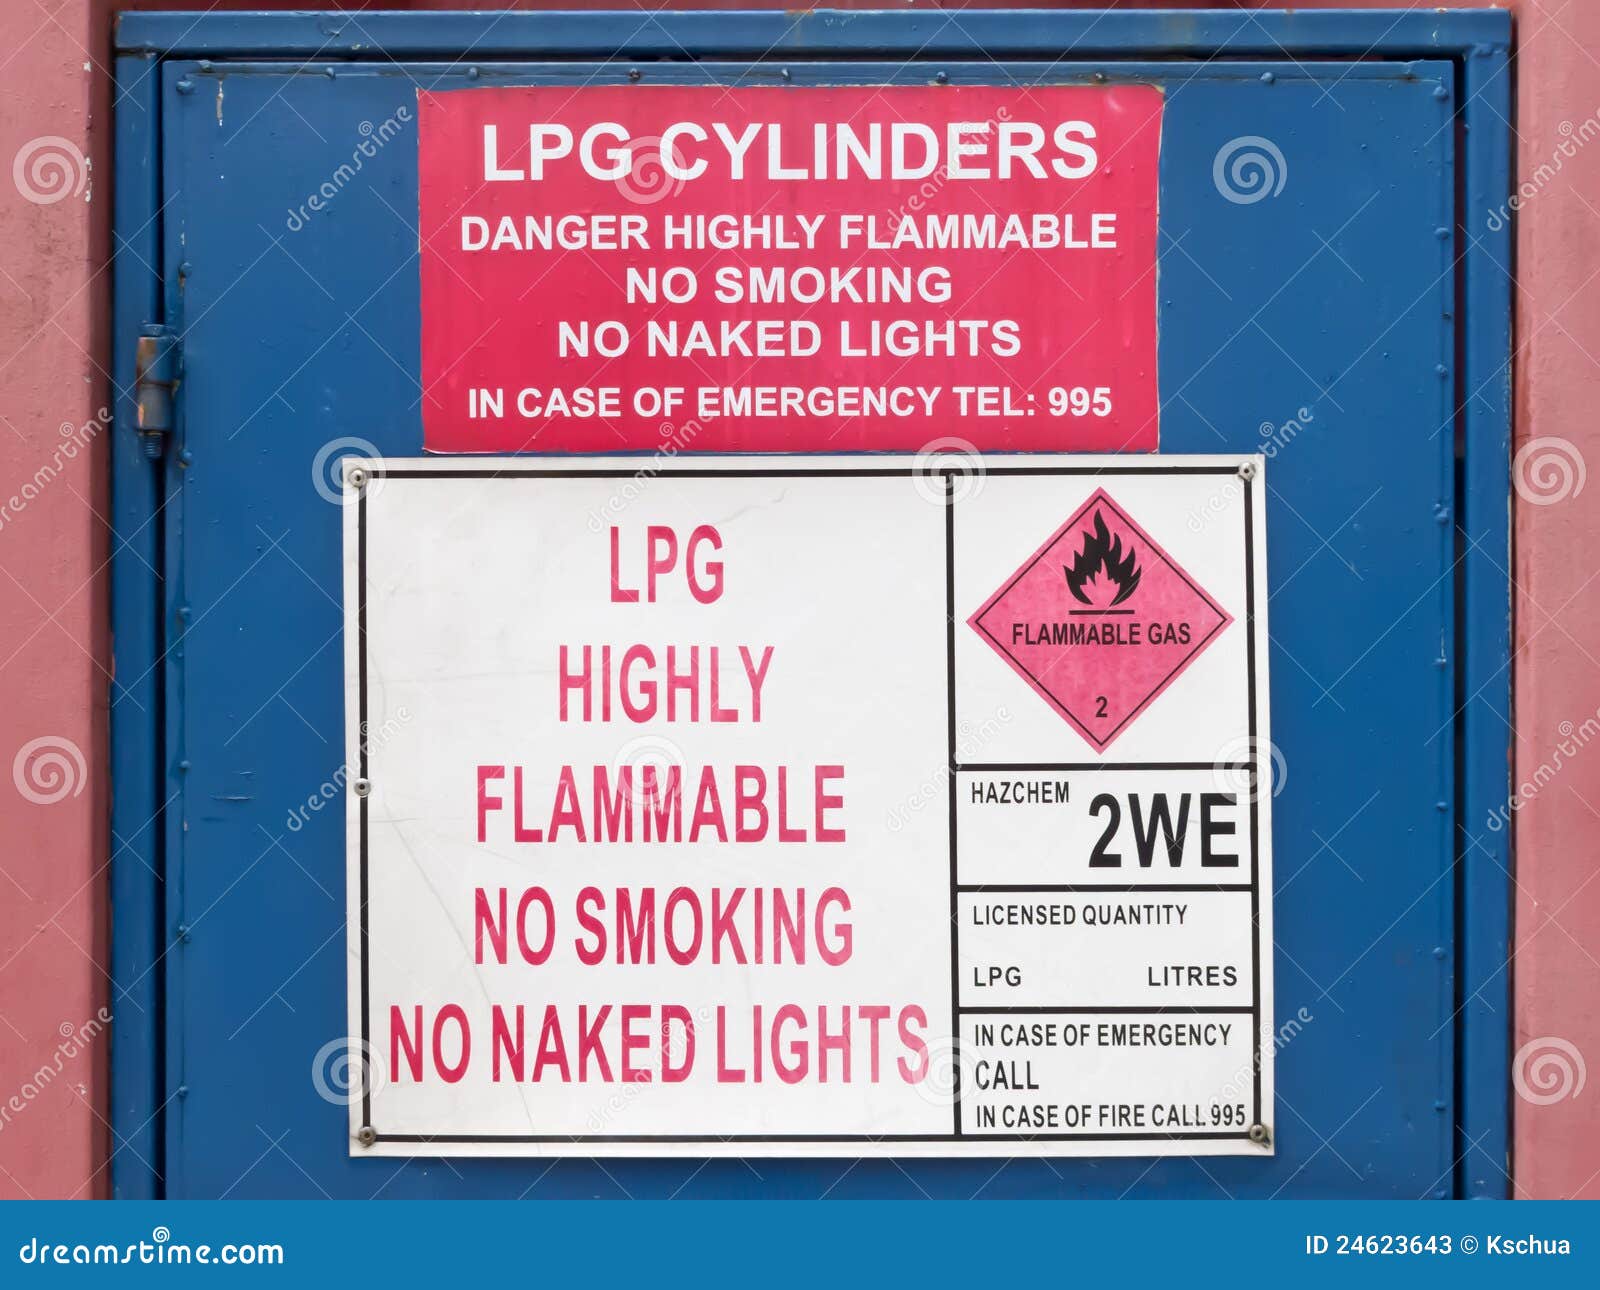 lpg highly inflammable sign